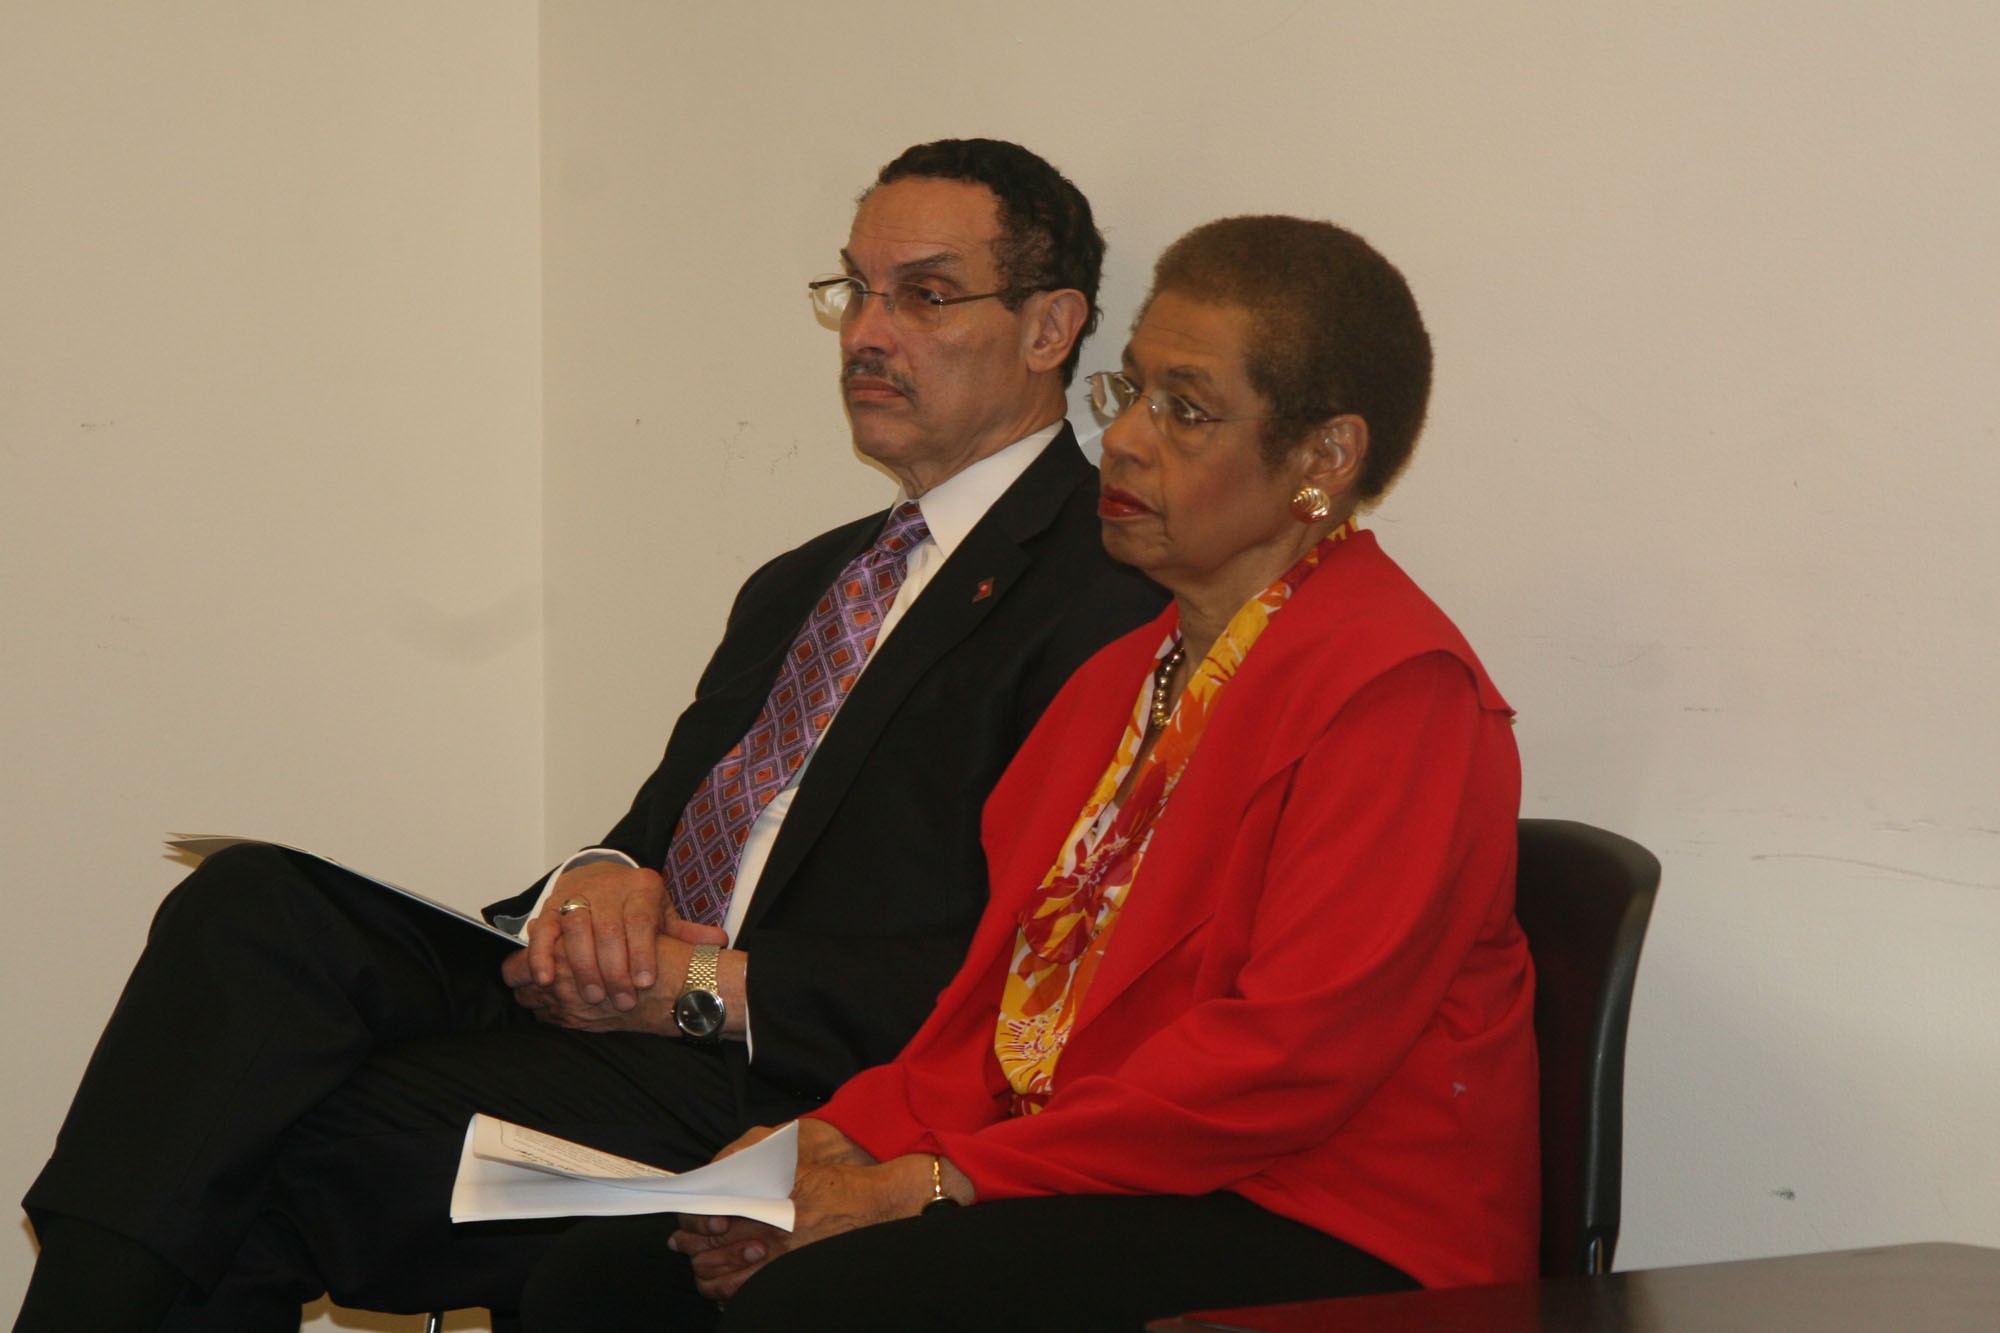 Washington, D.C., Mayor Vincent Gray and Delegate Eleanor Holmes Norton, the city's non-voting delegate in Congress, at a news conference to complain about what they call Congress' interference in the city's affairs.